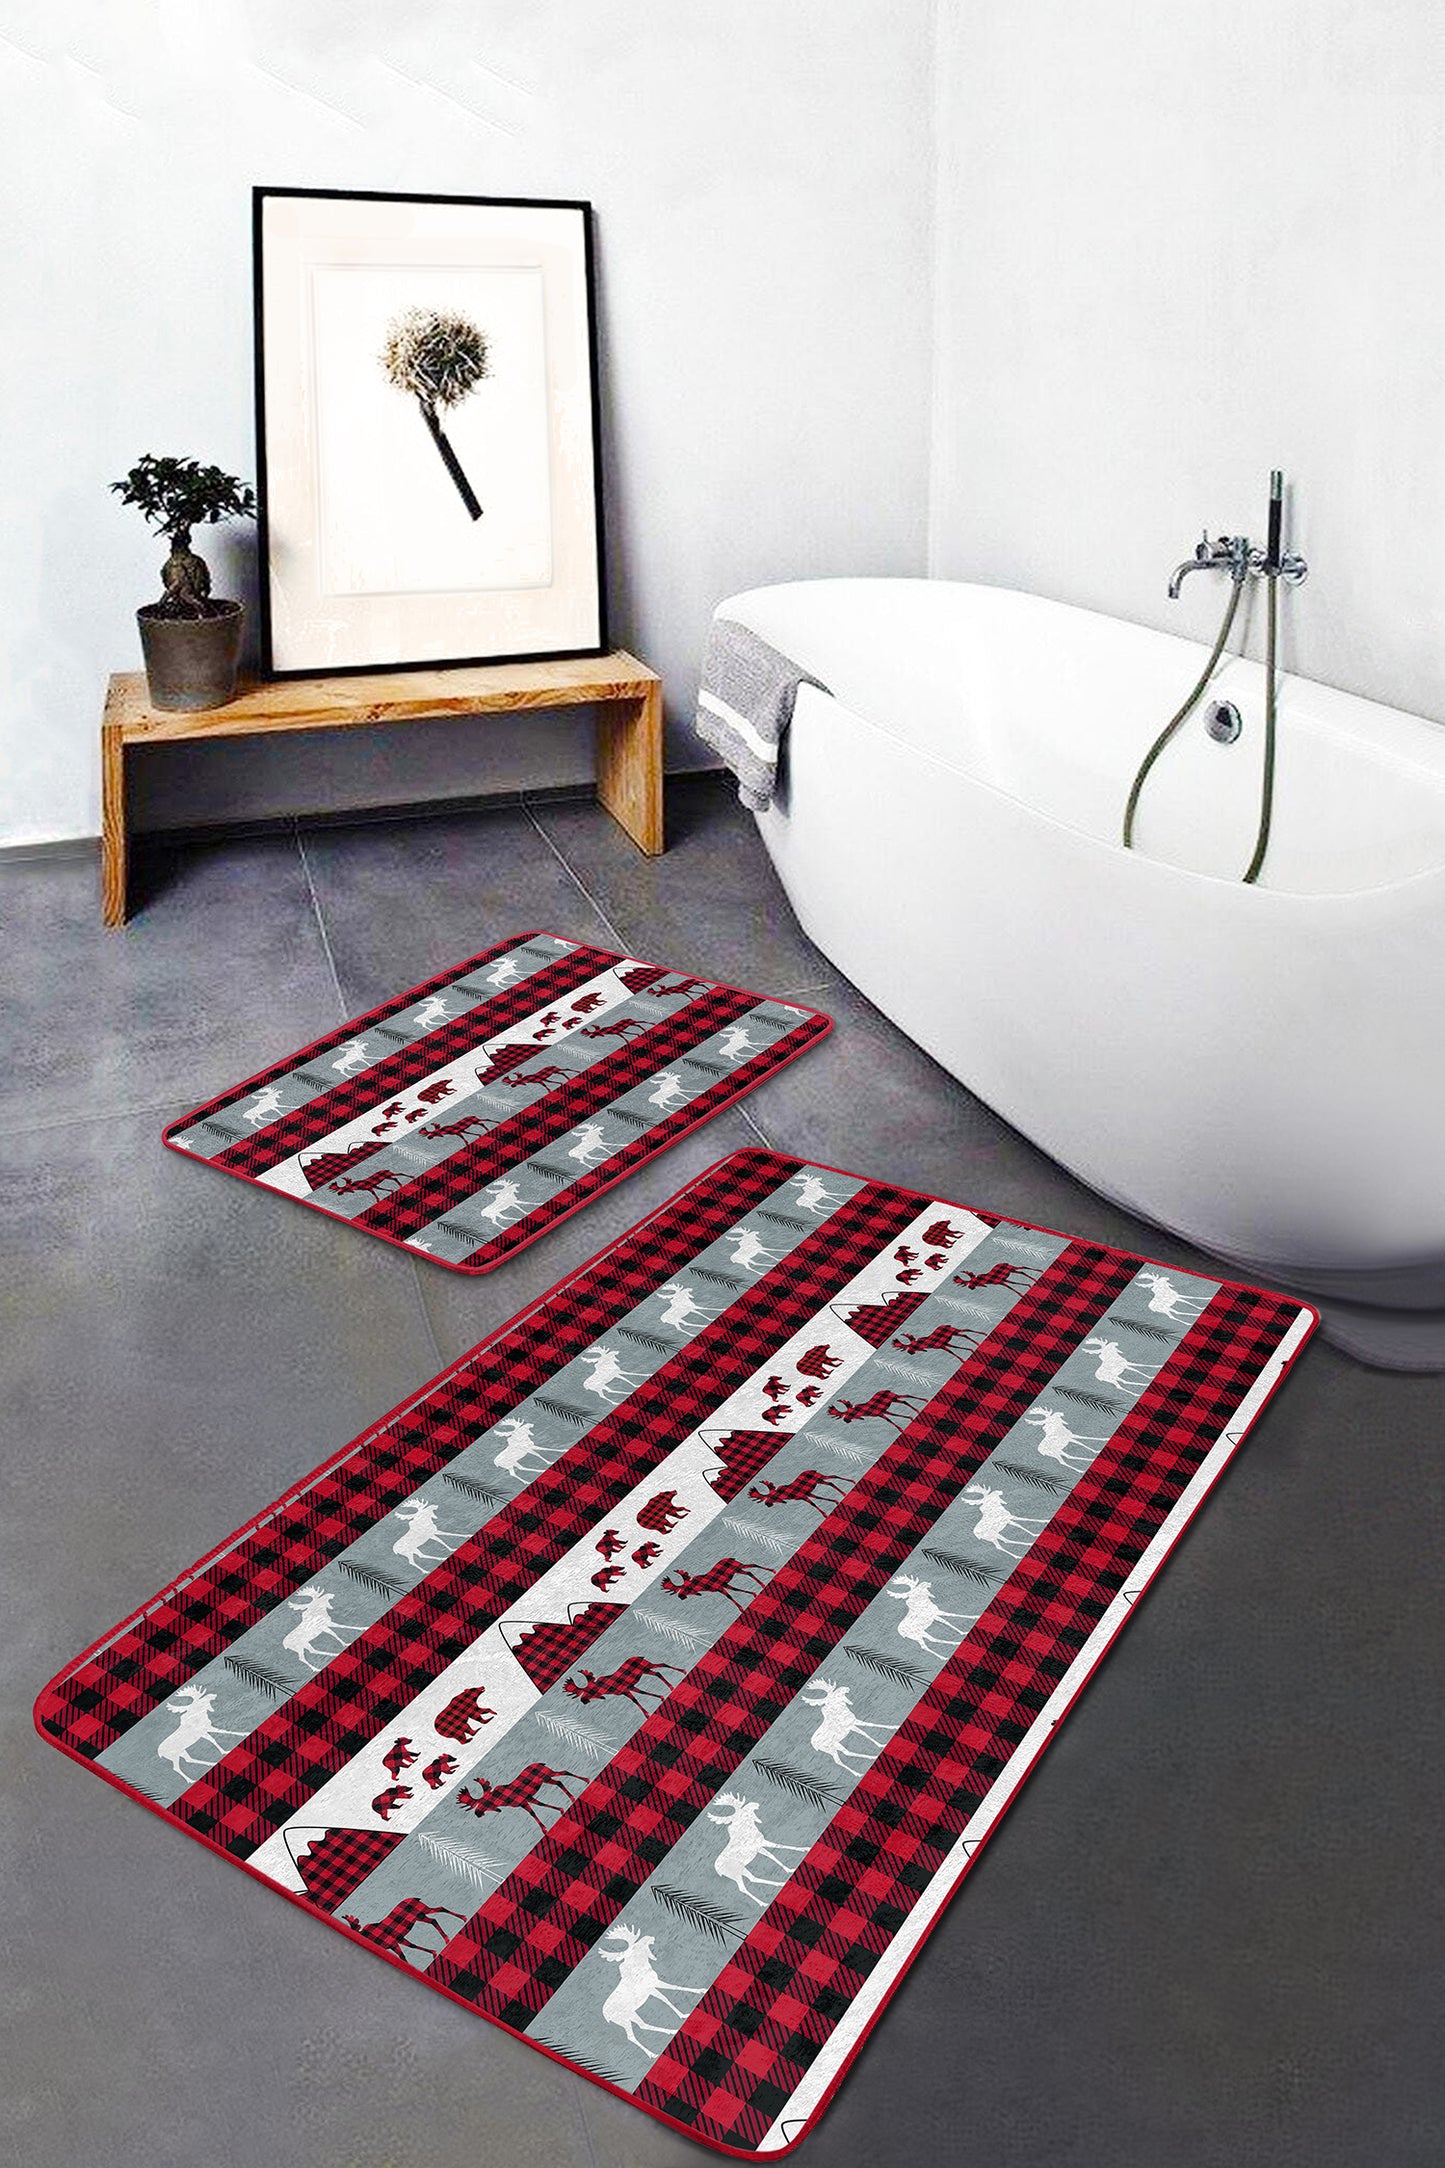 Decorative Bath Mat Set with a Charming Array of Christmas Patterns